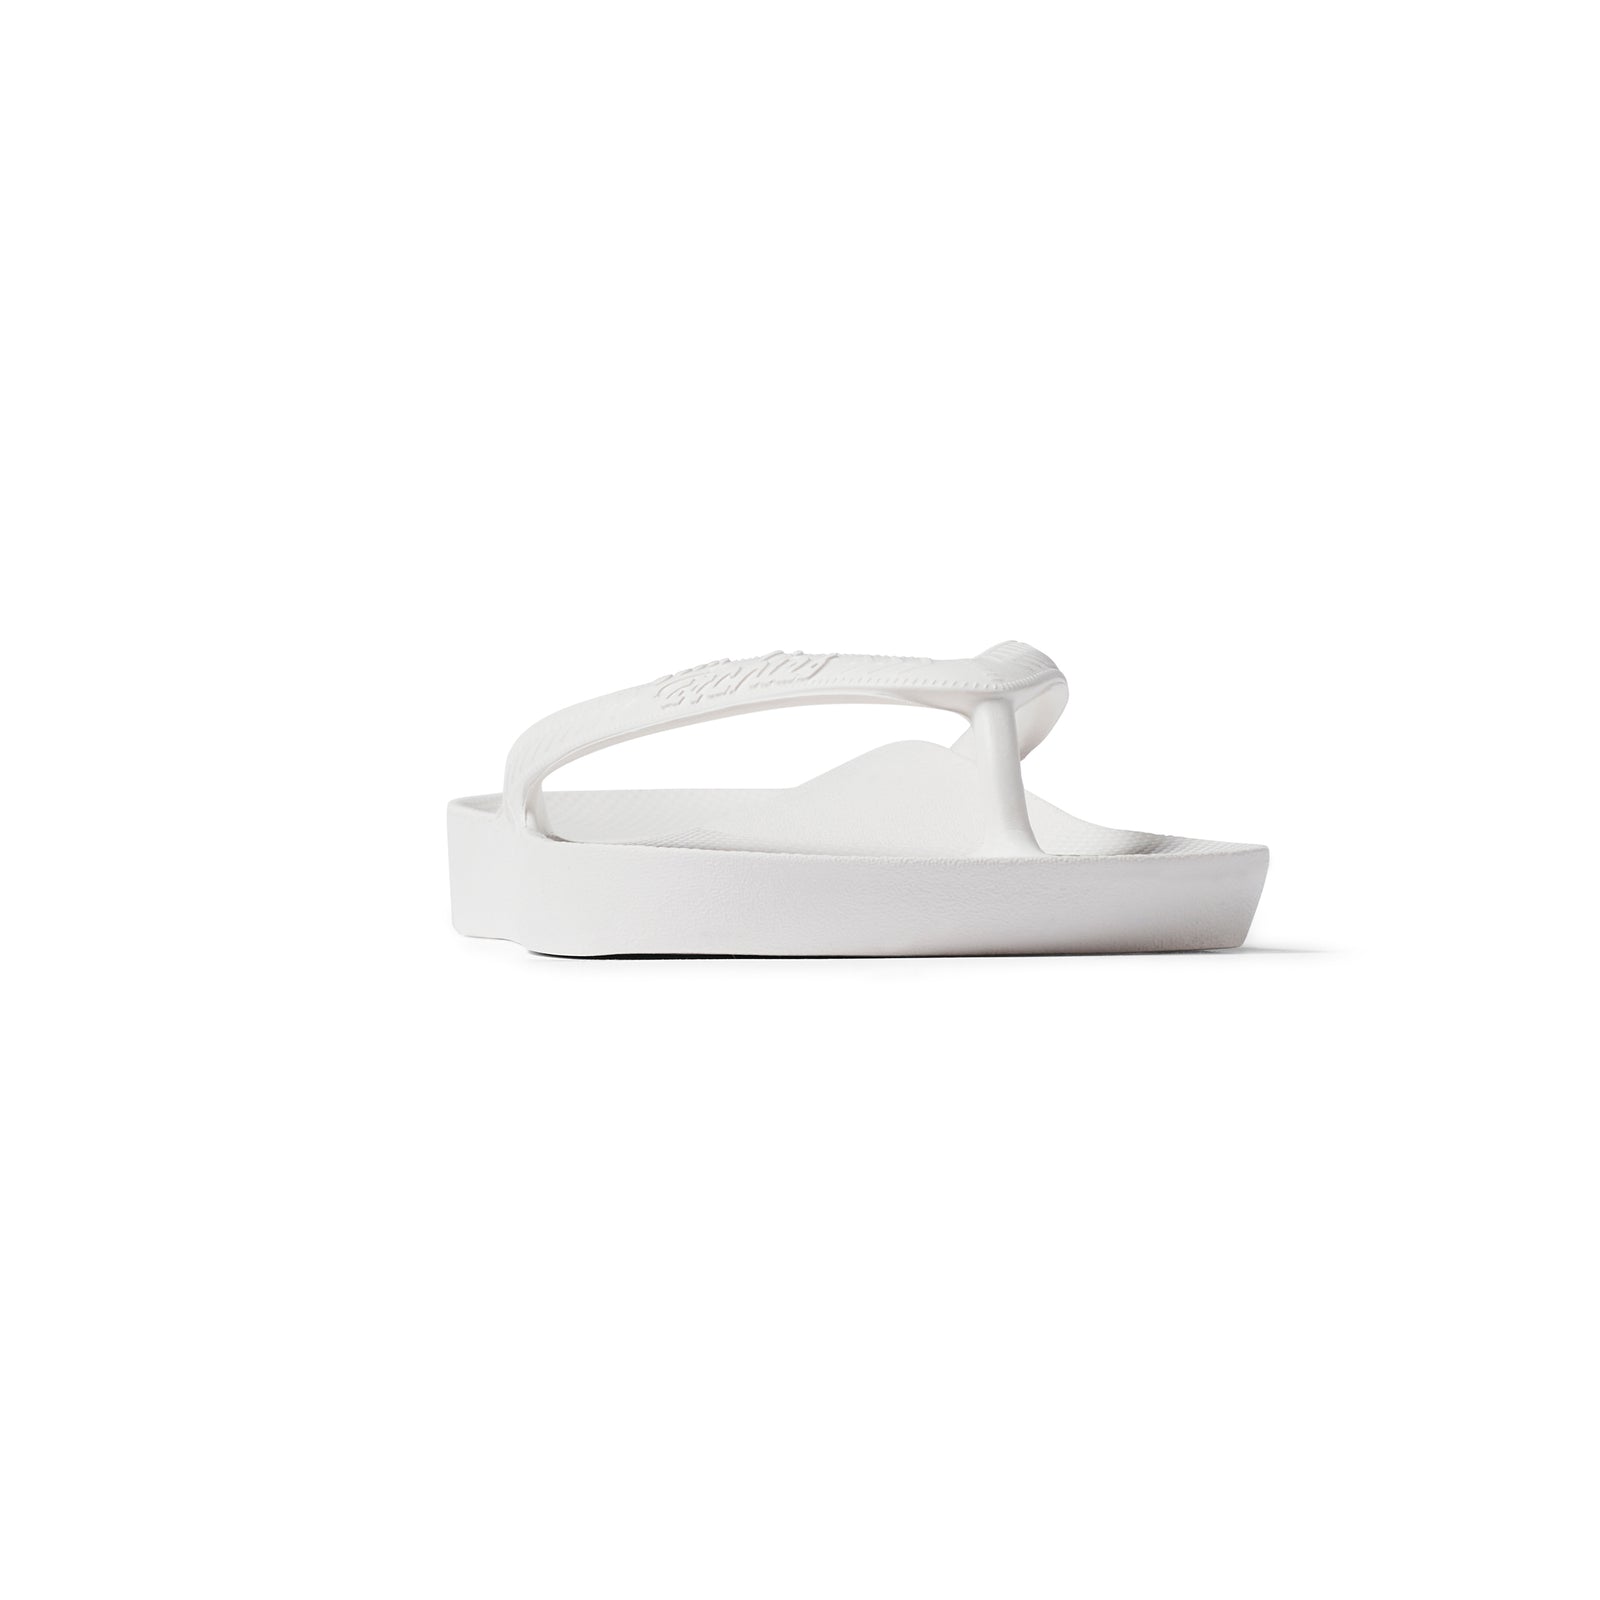 Coral Arch Support Flip Flops